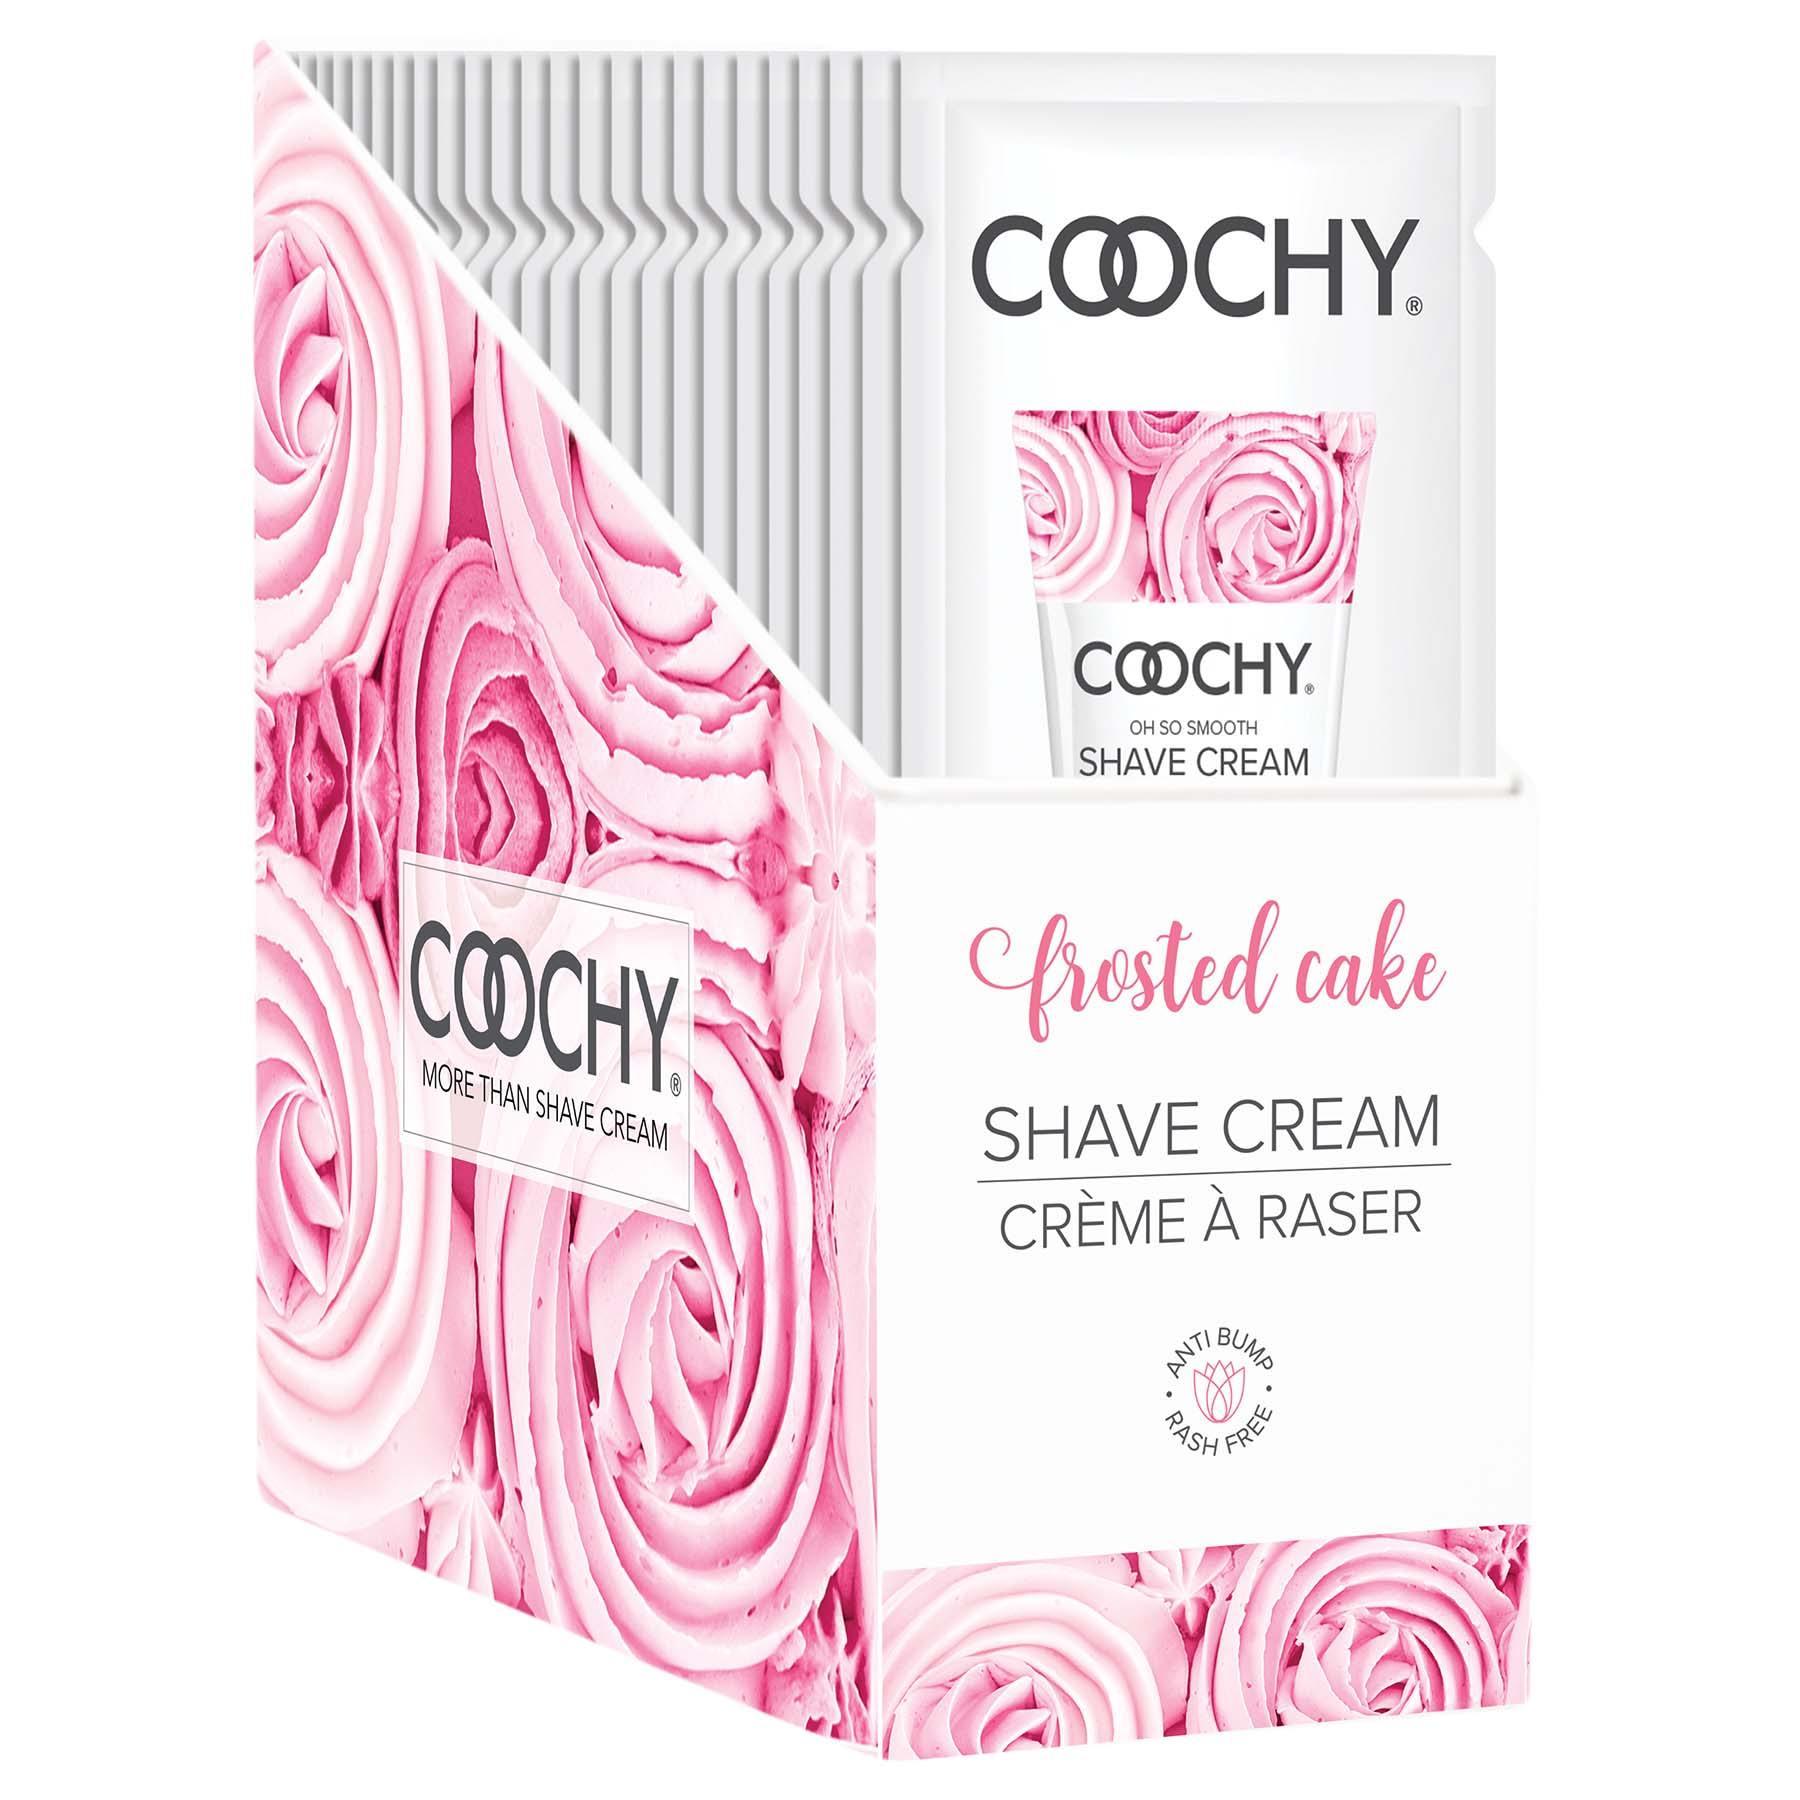 Coochy Shave Cream - Frosted Cake - 15 ml Foils 24 Count Display - My Sex Toy Hub